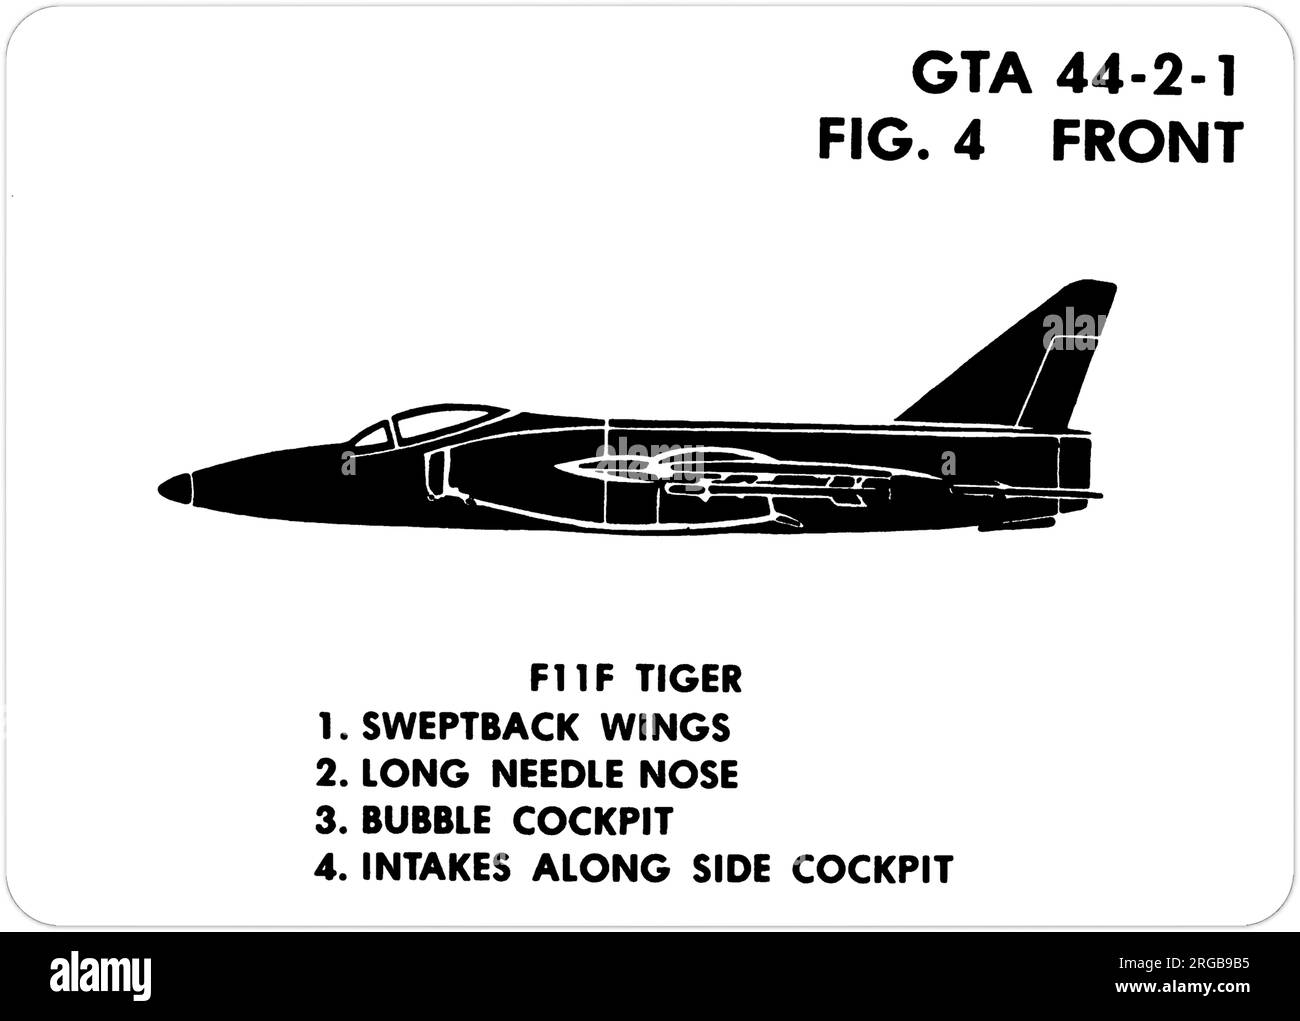 Grumman F11F-1 Tiger profile. This is one of the series of Graphics Training Aids (GTA) used by the United States Army to train their personnel to recognize friendly and hostile aircraft. This particular set, GTA 44-2-1, was issued in July1977. The set features aircraft from: Canada, Italy, United Kingdom, United States, and the USSR. Stock Photo